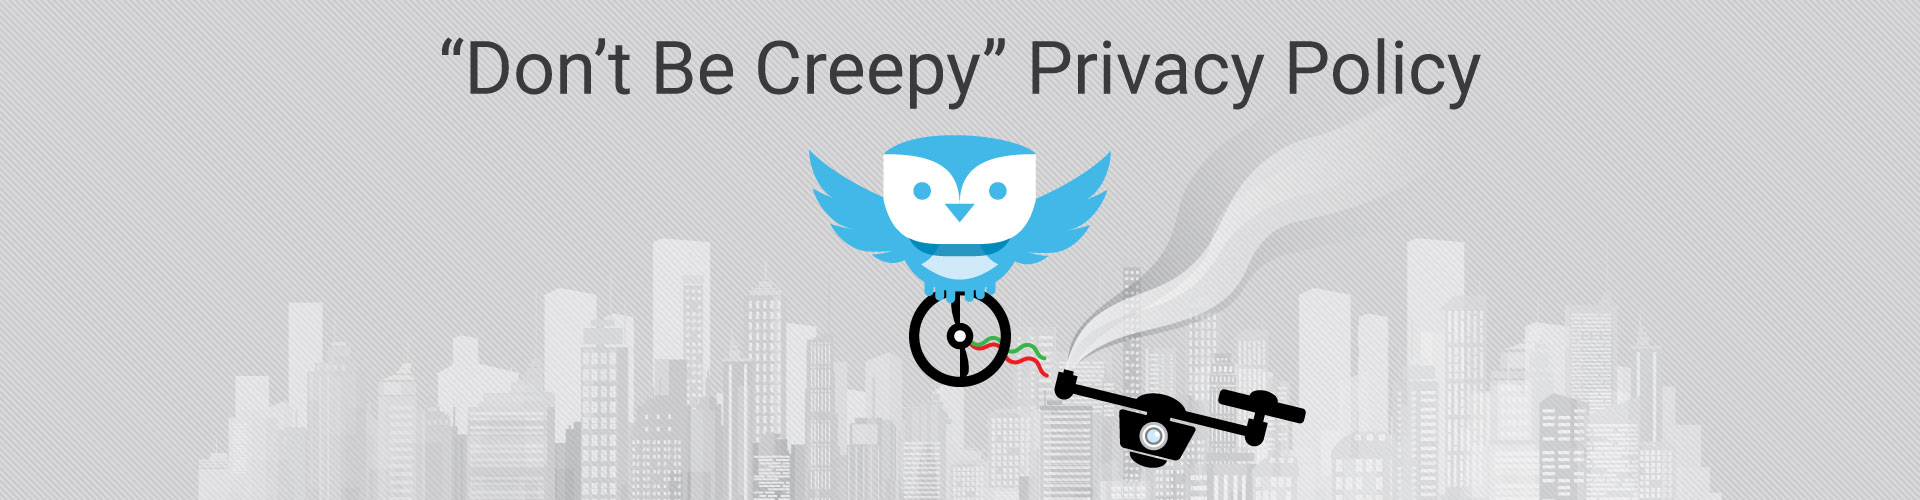 Privacy Policy Header Image